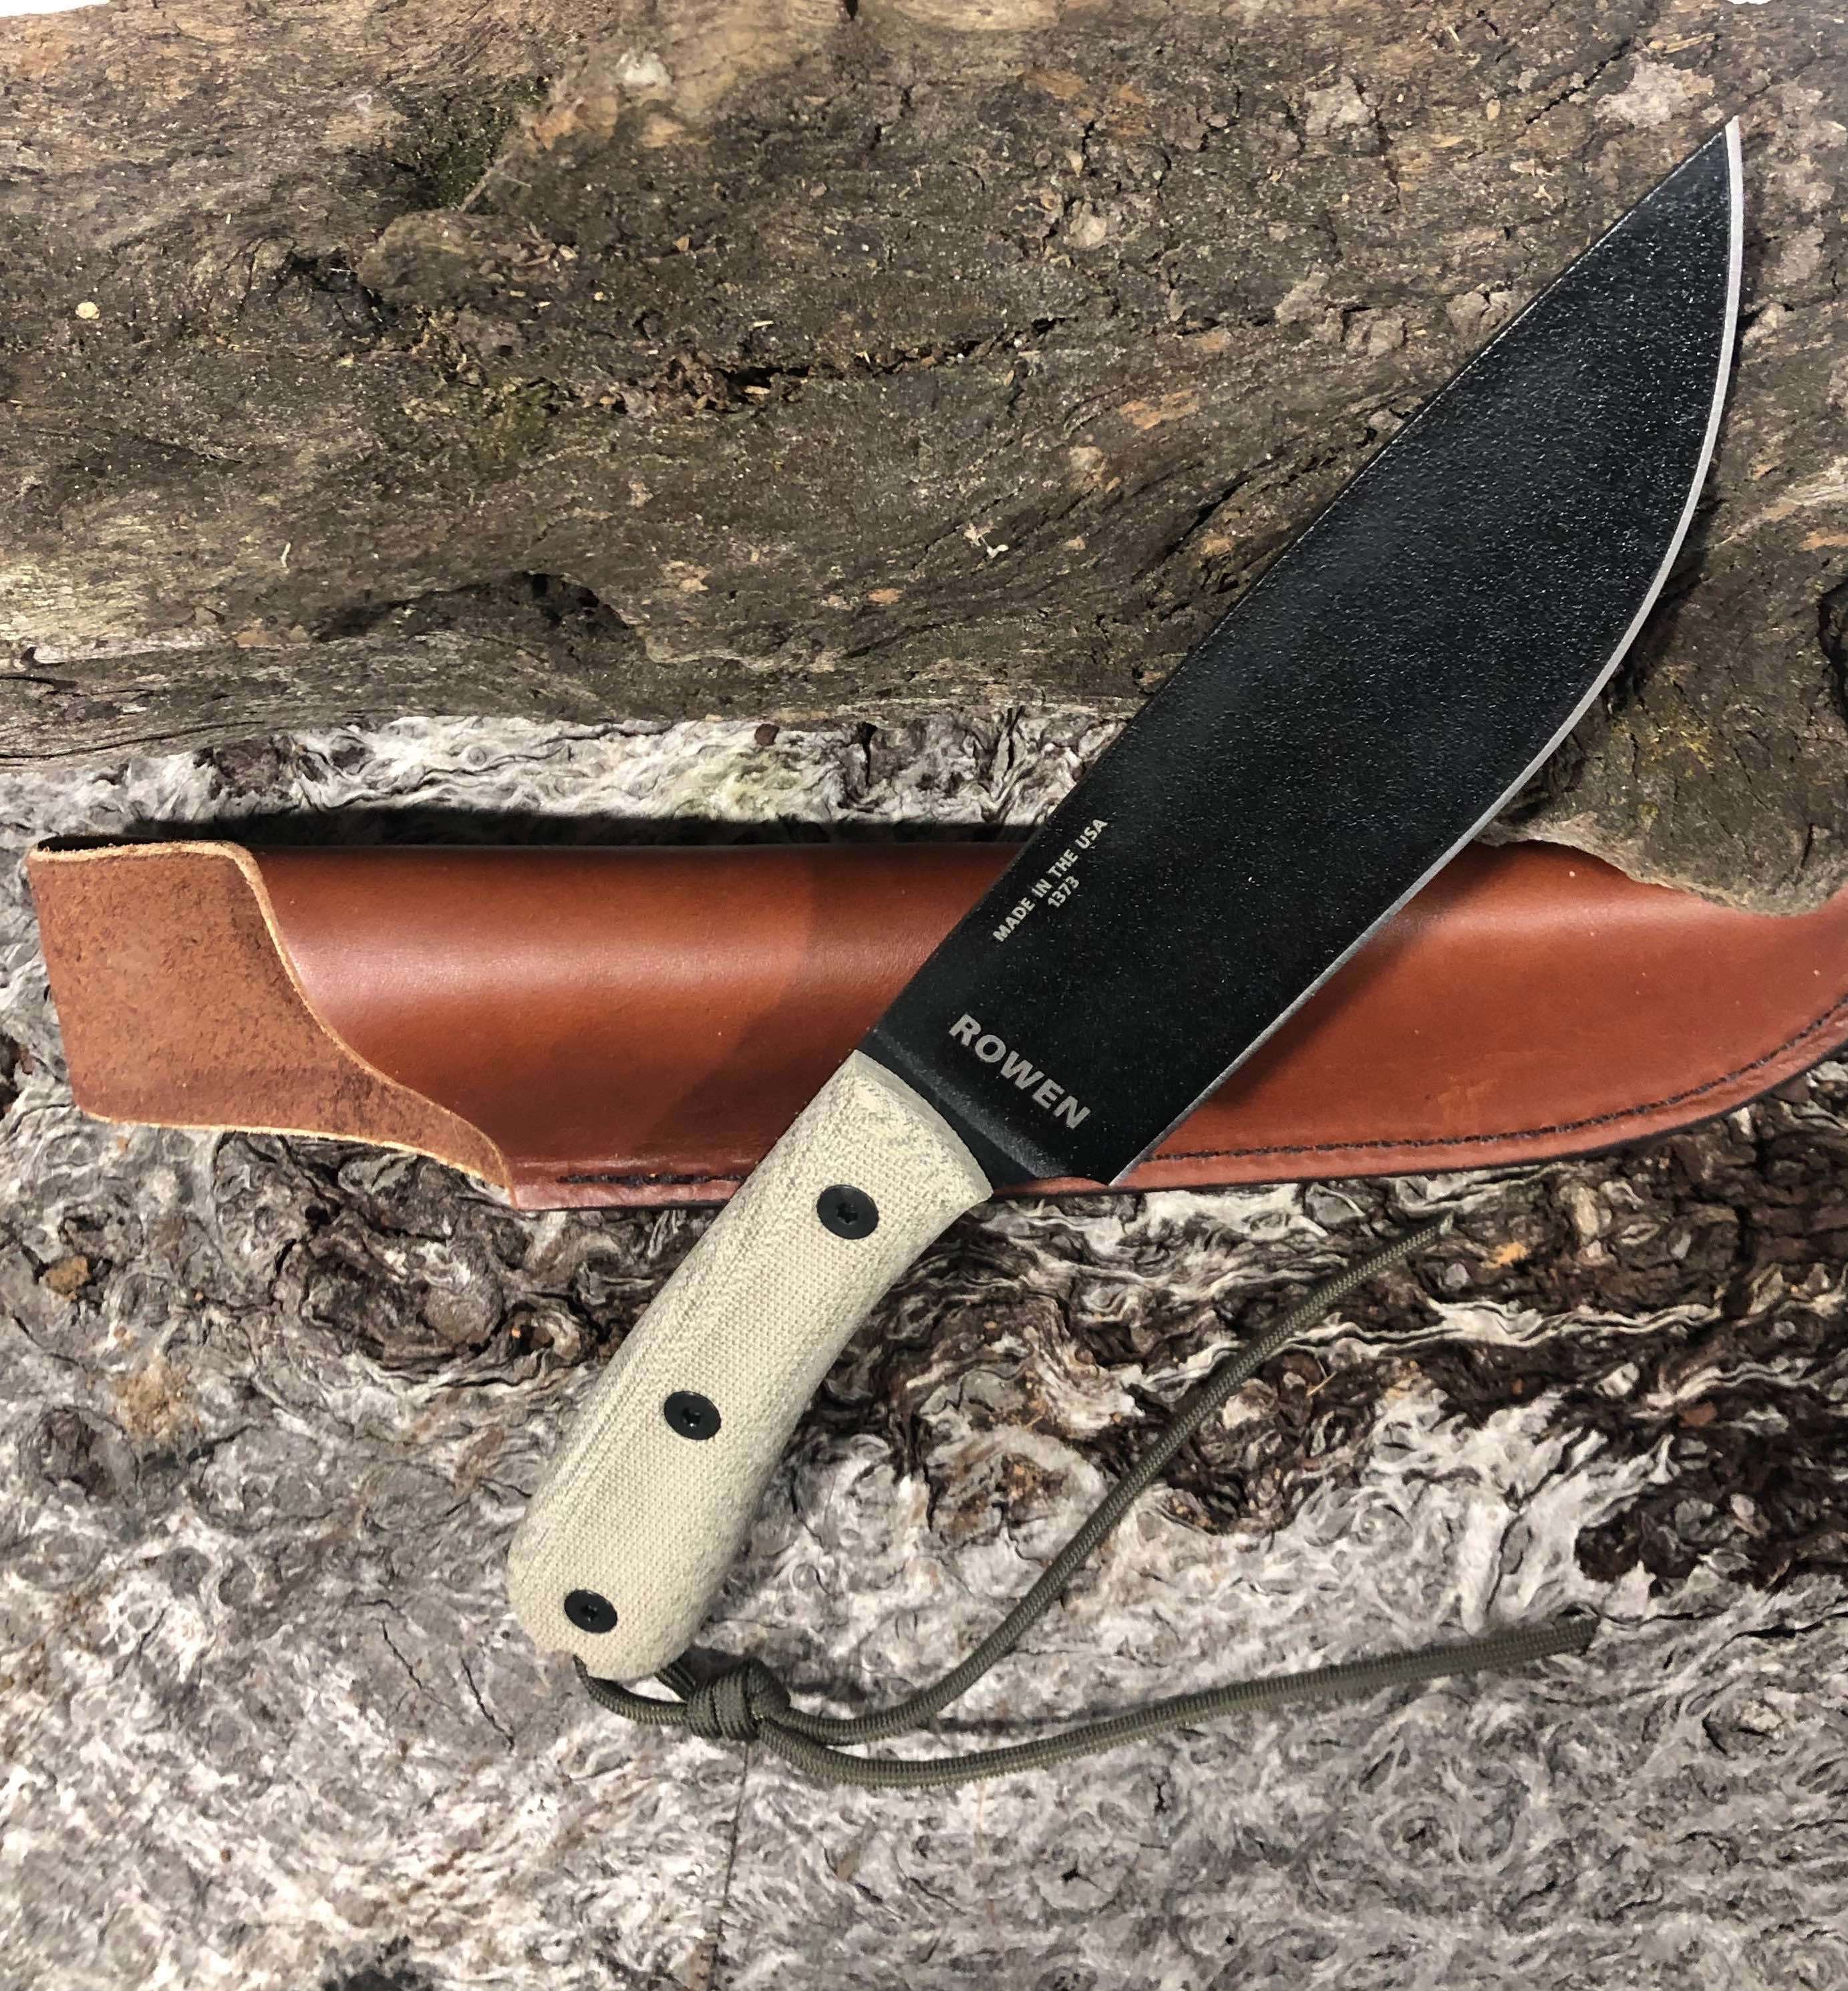 ESEE 6HM-B Modified Handle Knife